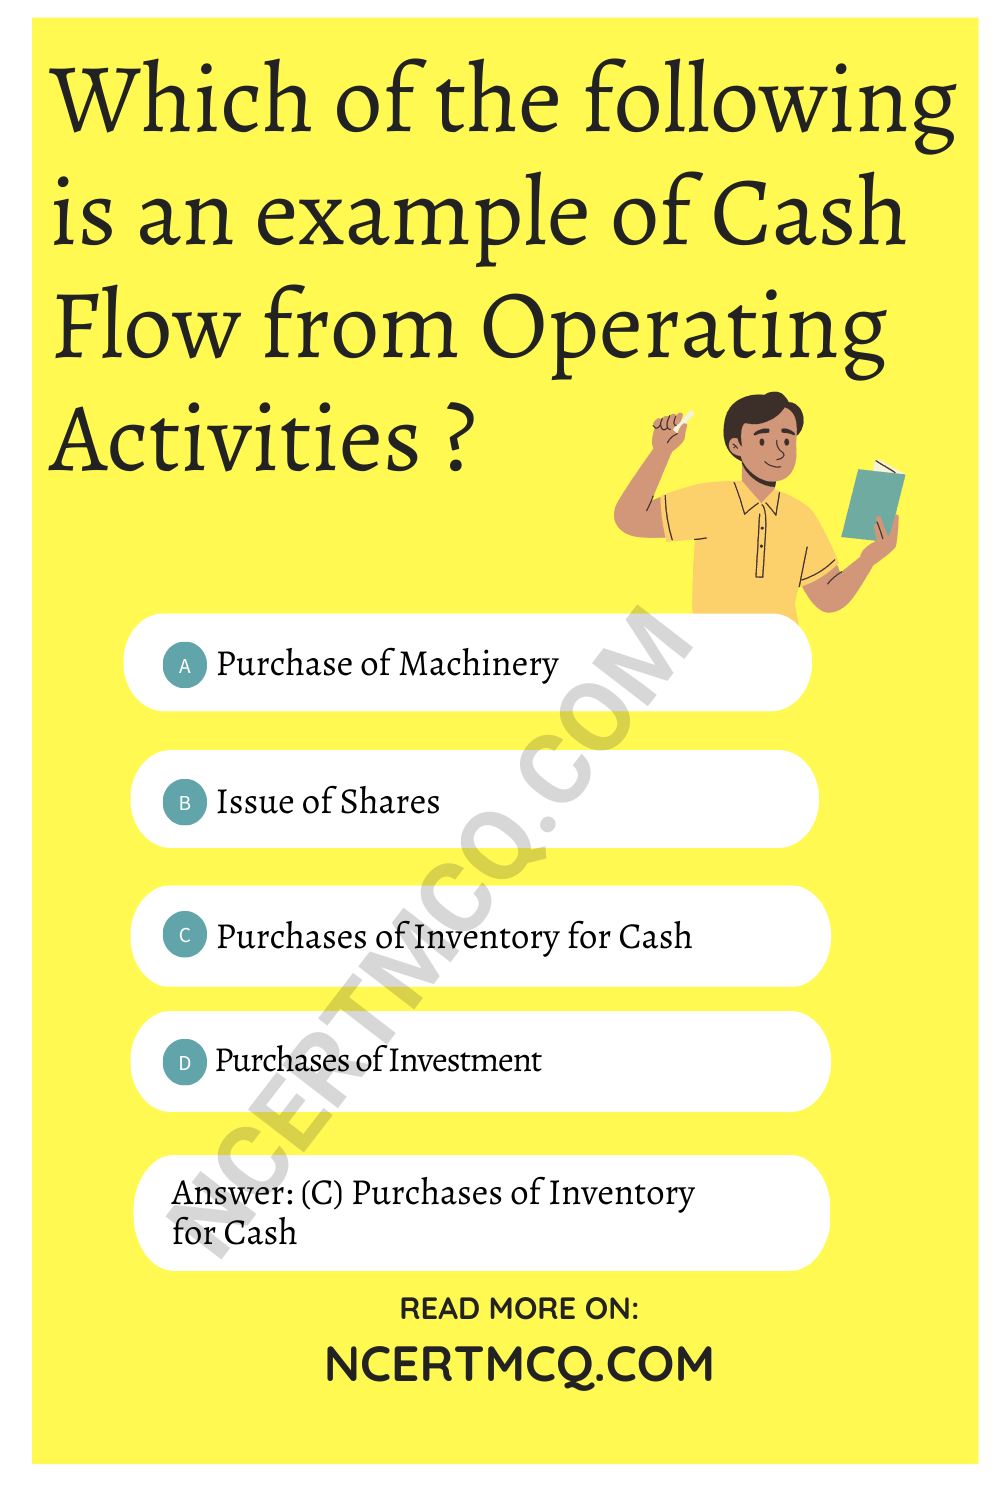 Which of the following is an example of Cash Flow from Operating Activities ?